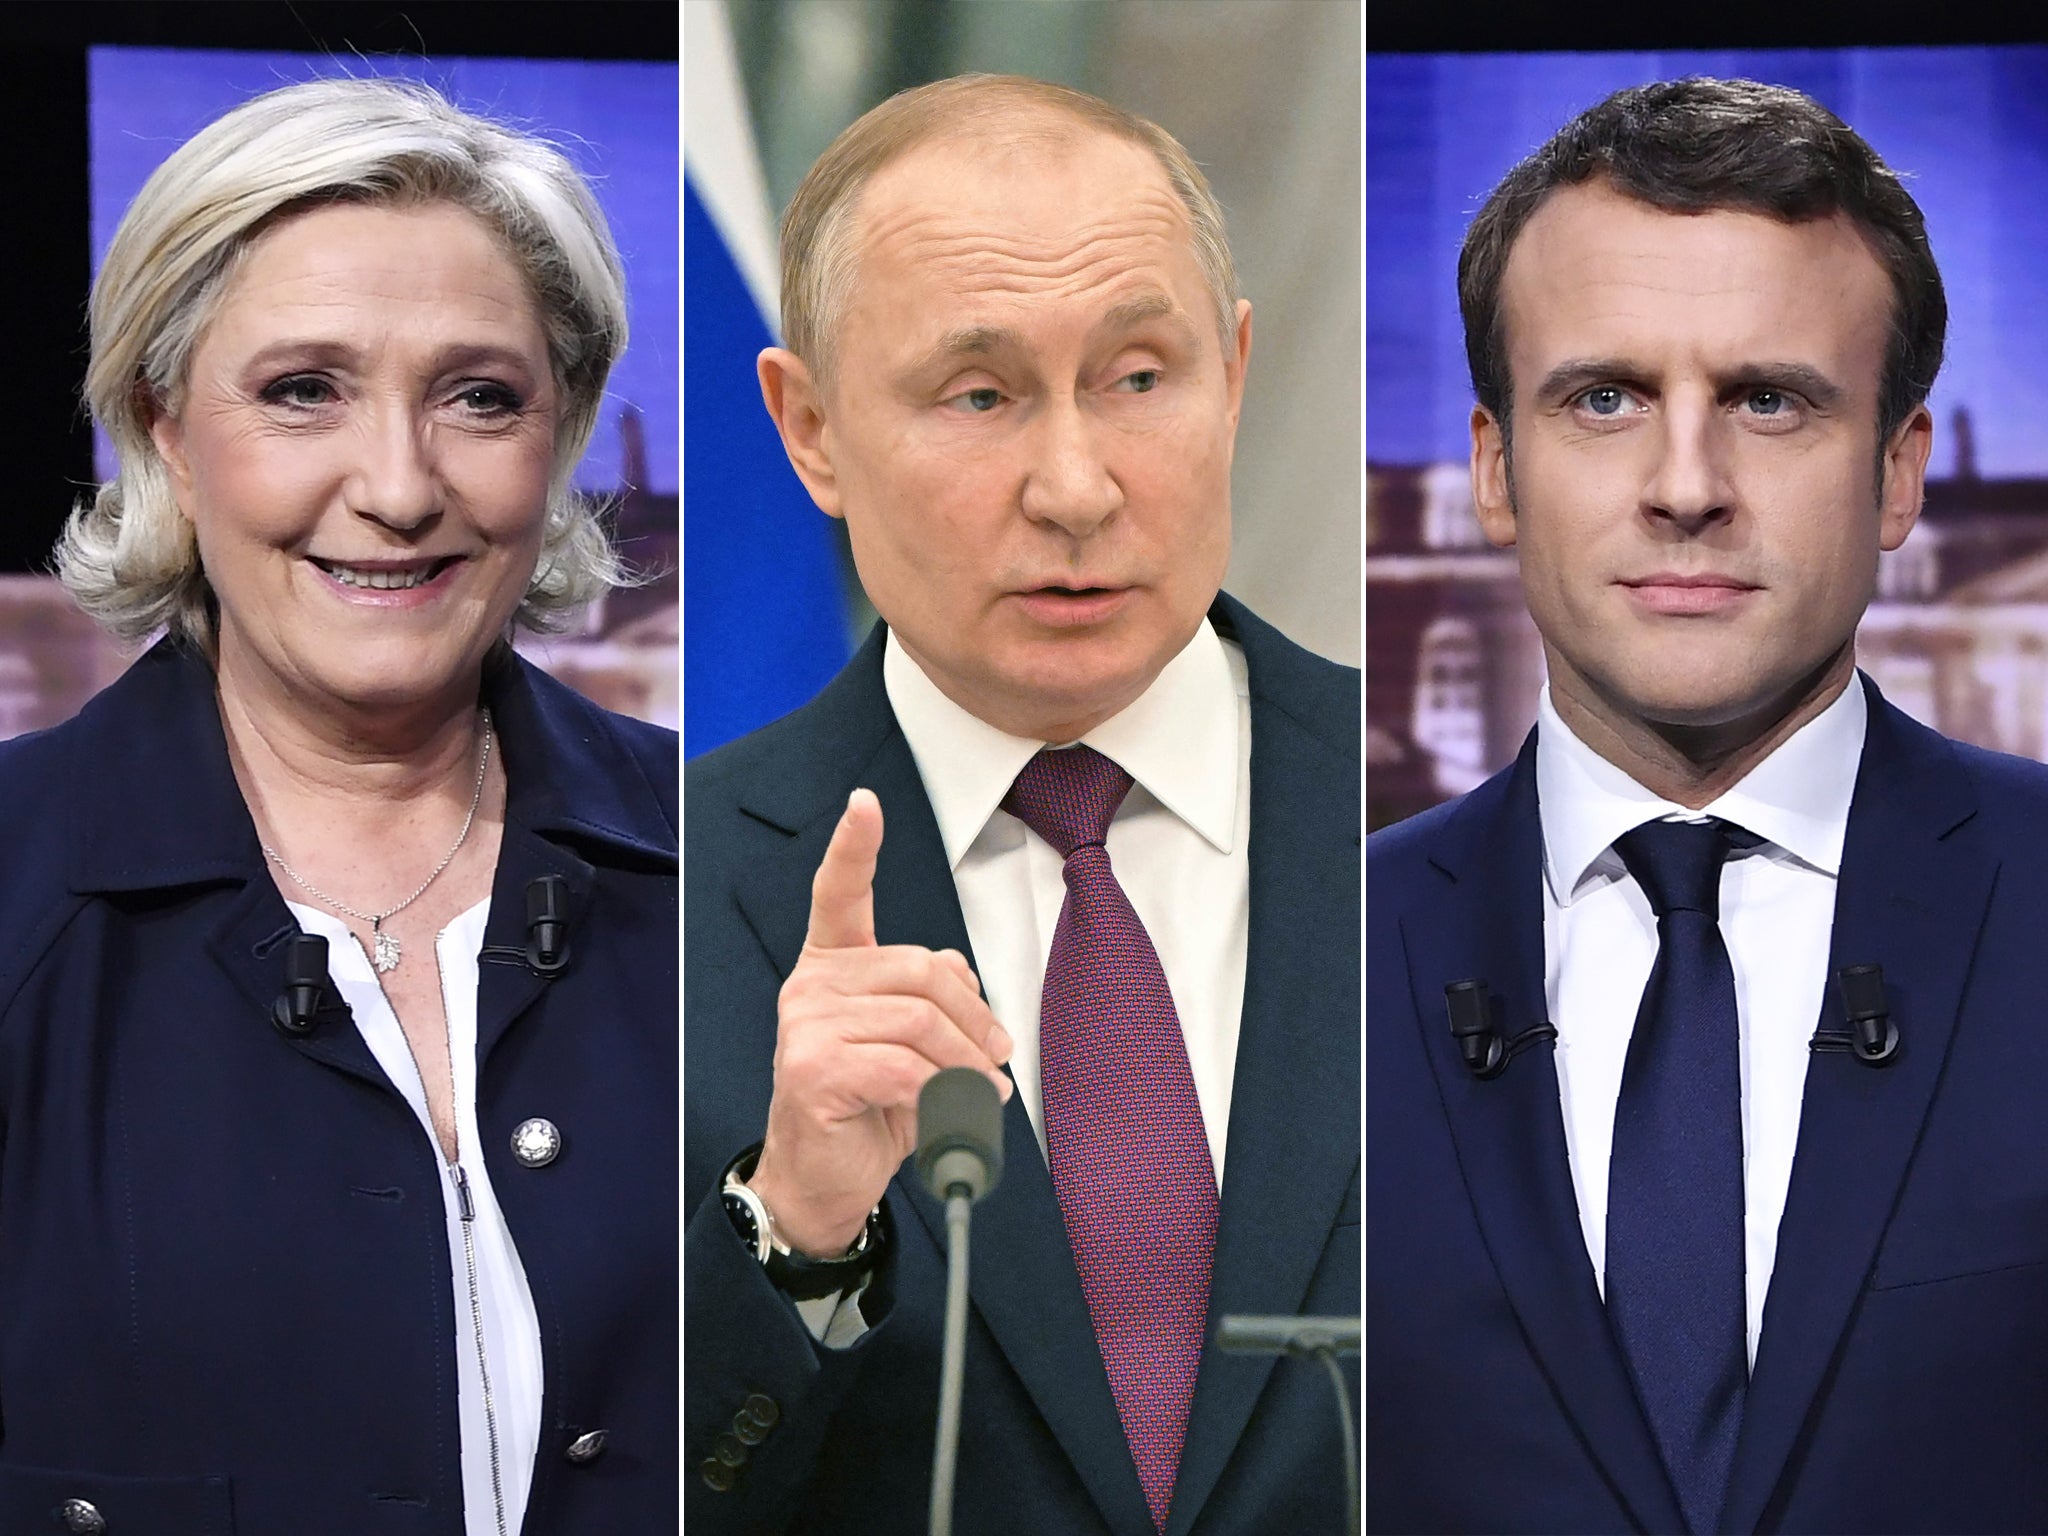 The ties between Le Pen (far left) and Putin (middle) are thought to have played a key part in her defeat to Macron (far right)